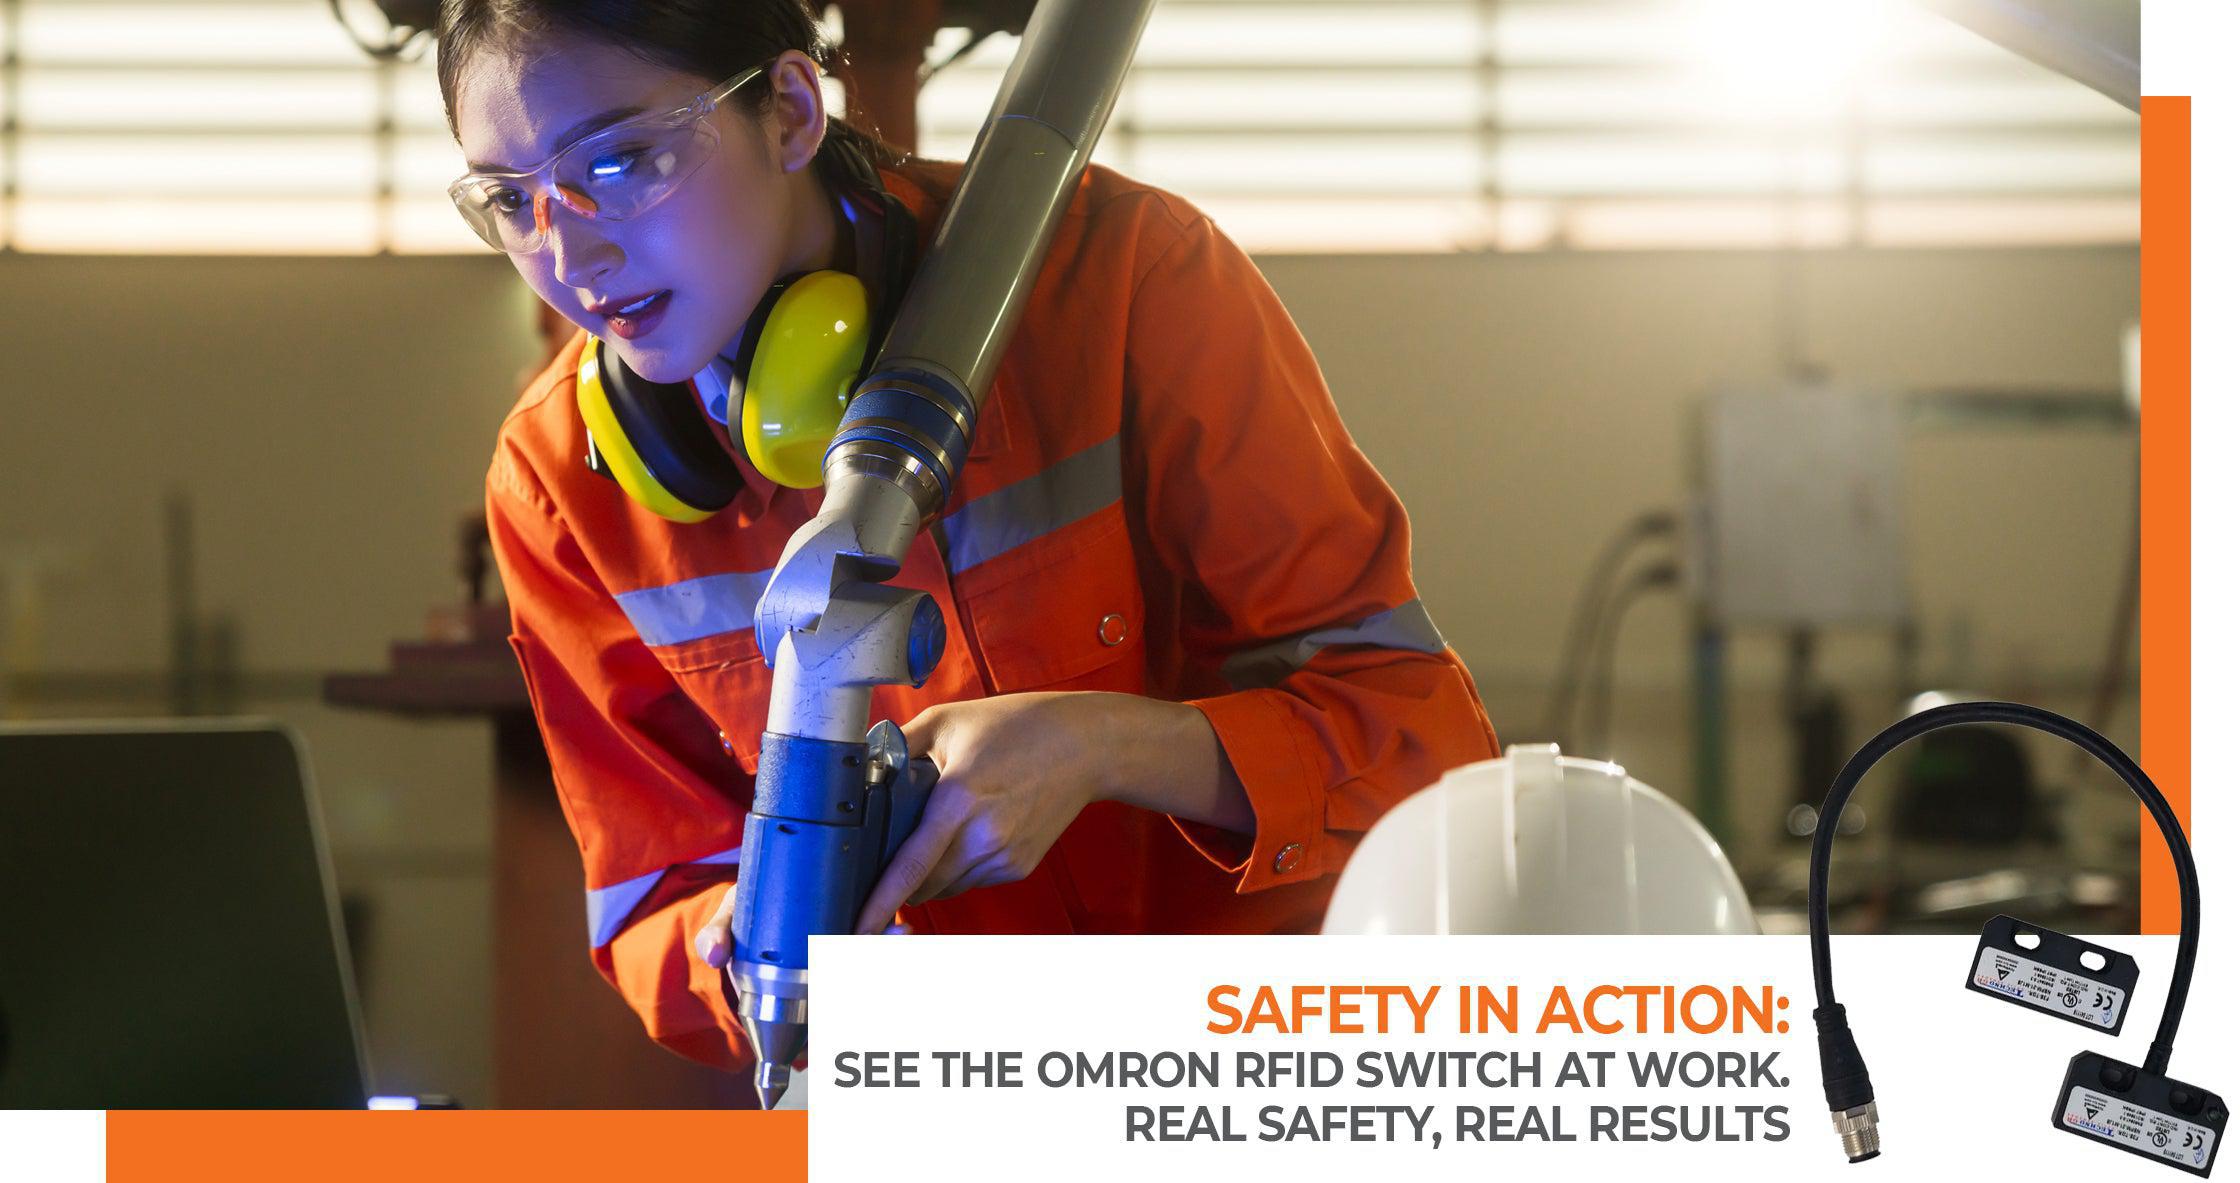 Focused technician using Omron RFID switch for safety monitoring on automated equipment in an industrial setting